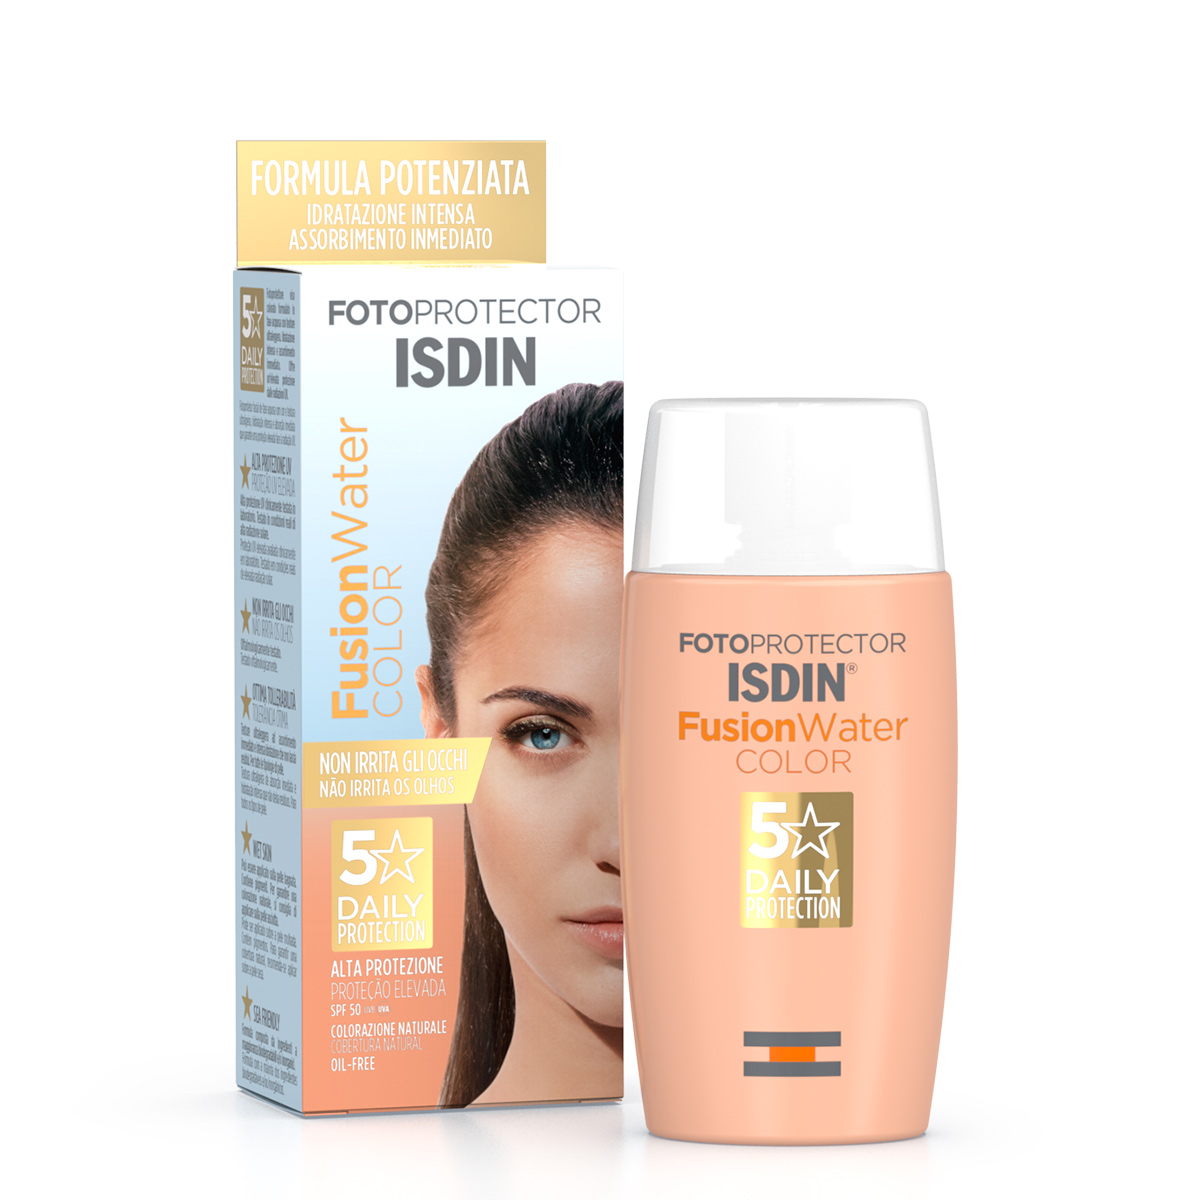 Fotoprotector Isdin FusionWater Color Spf 50 Solare 50 ml